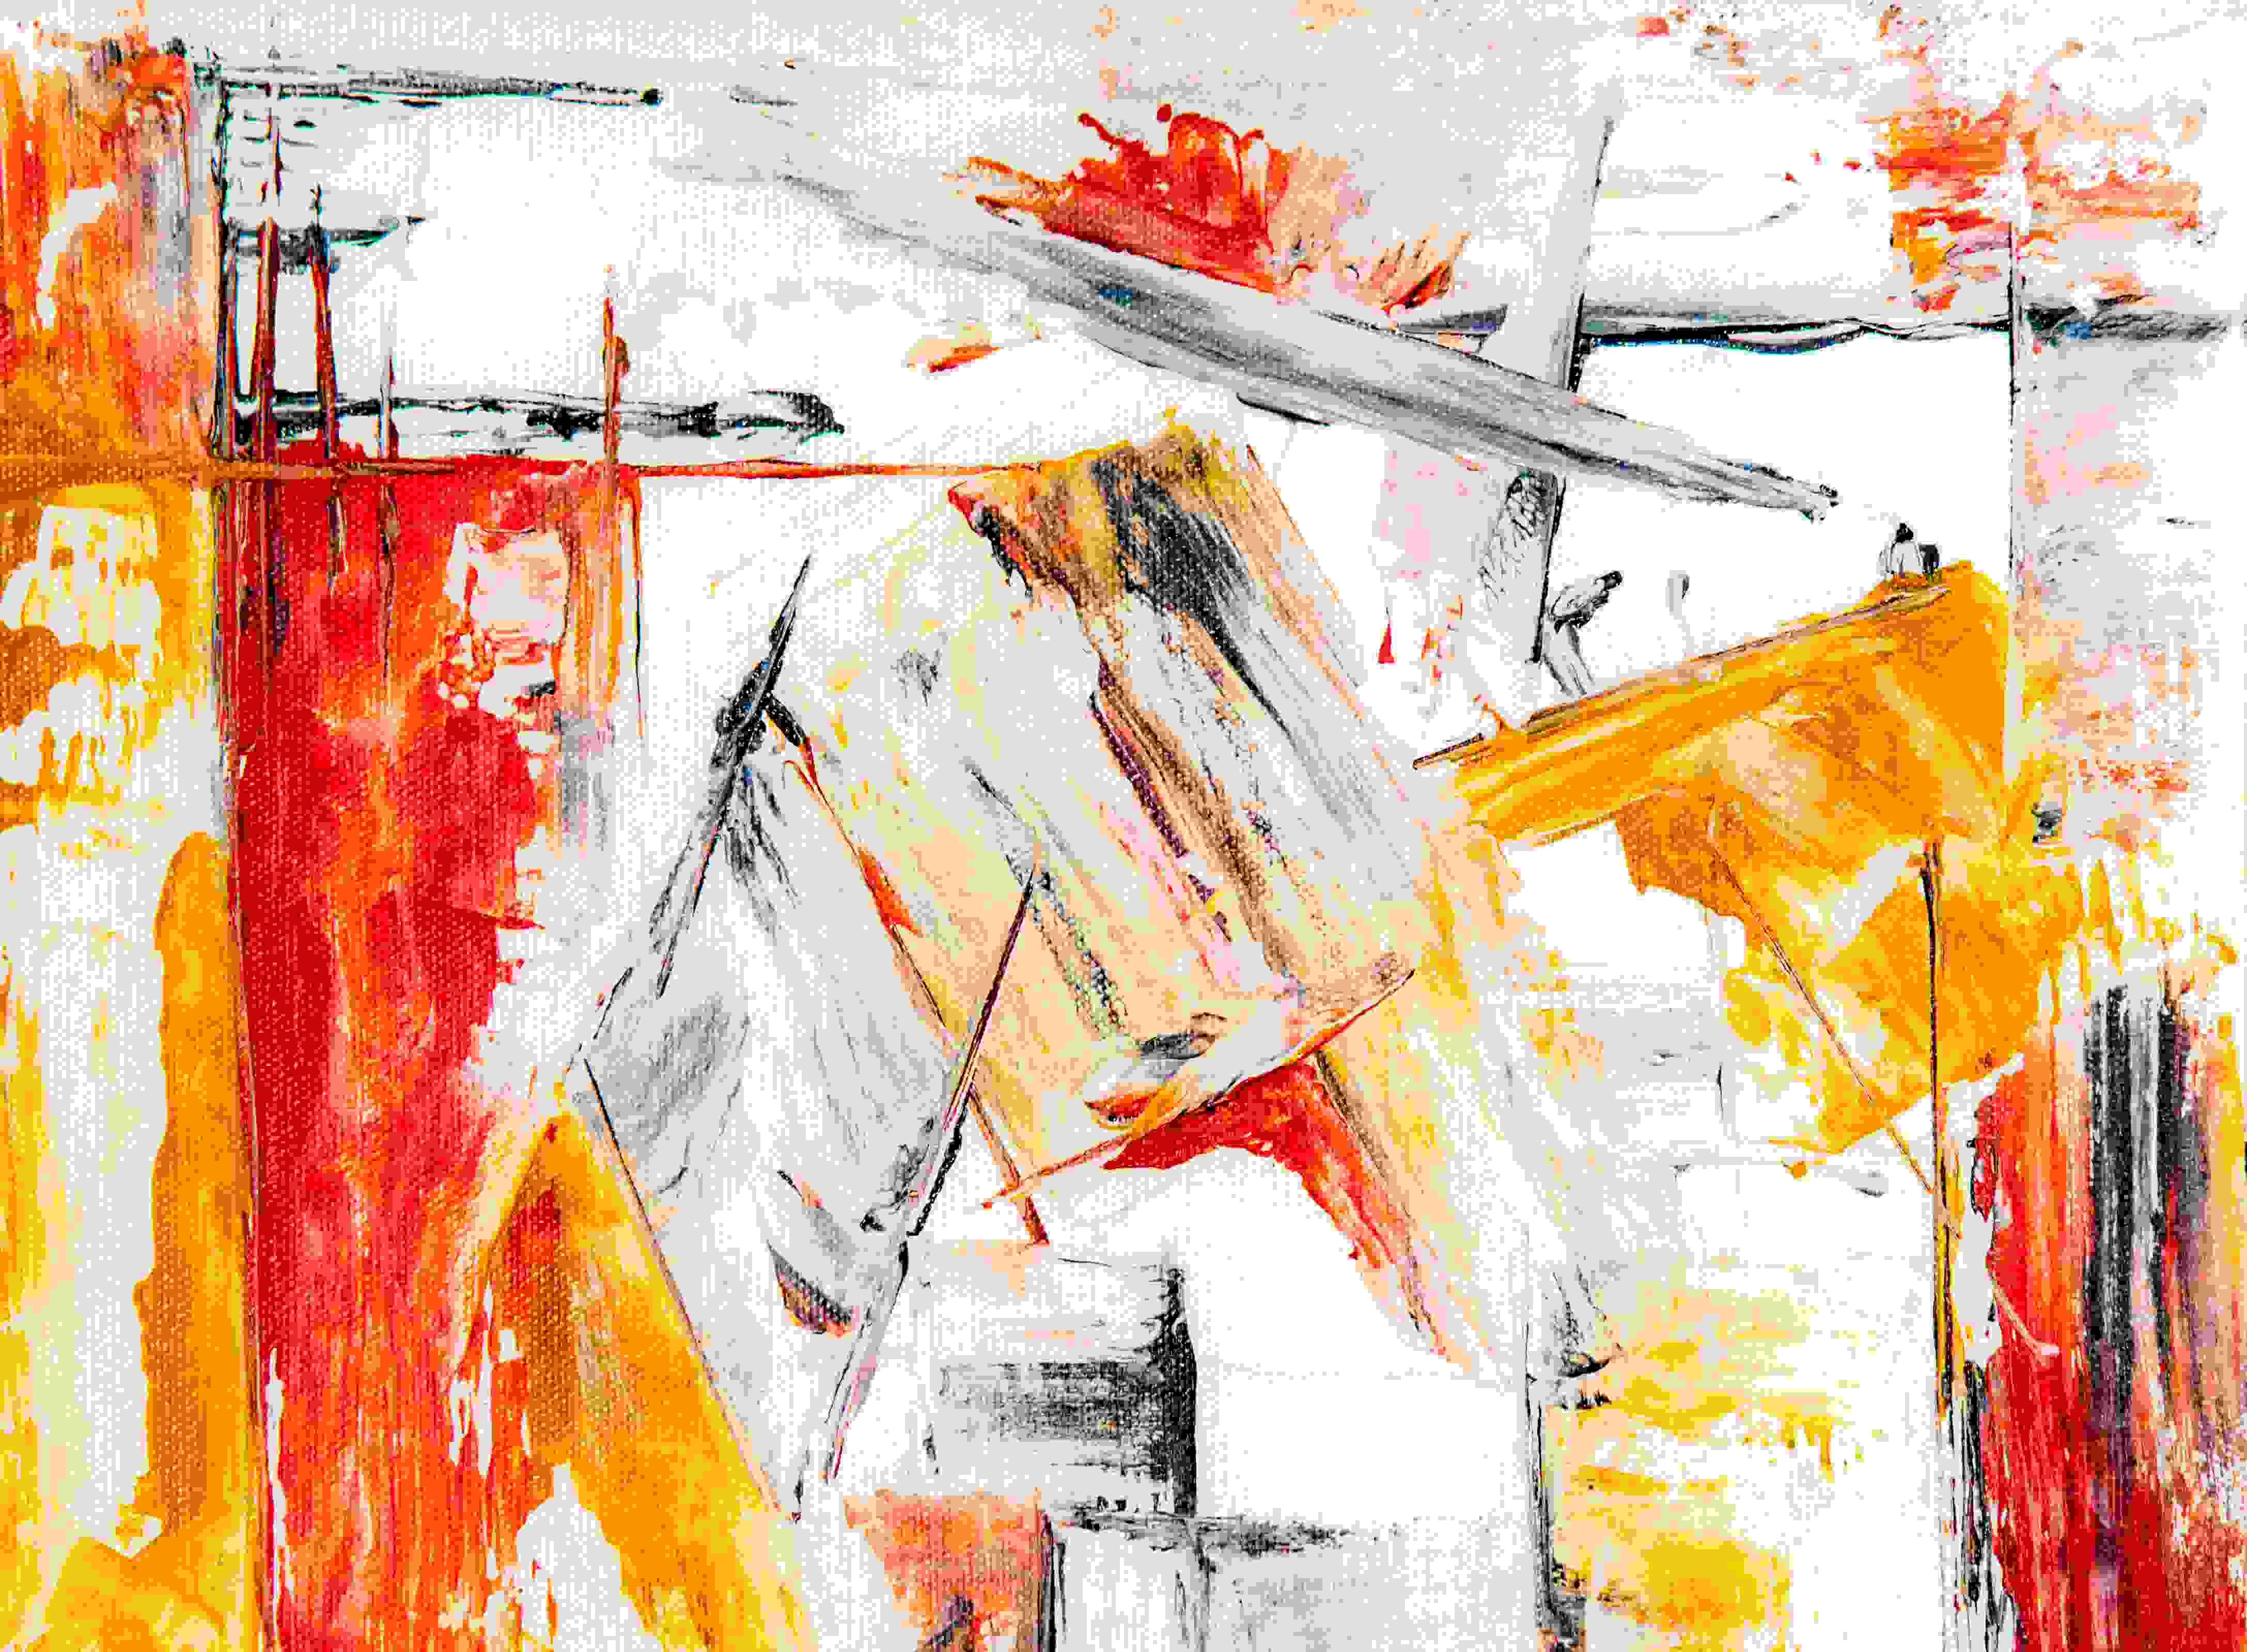 Online Abstract Painting Course | Online Abstract Painting Classes